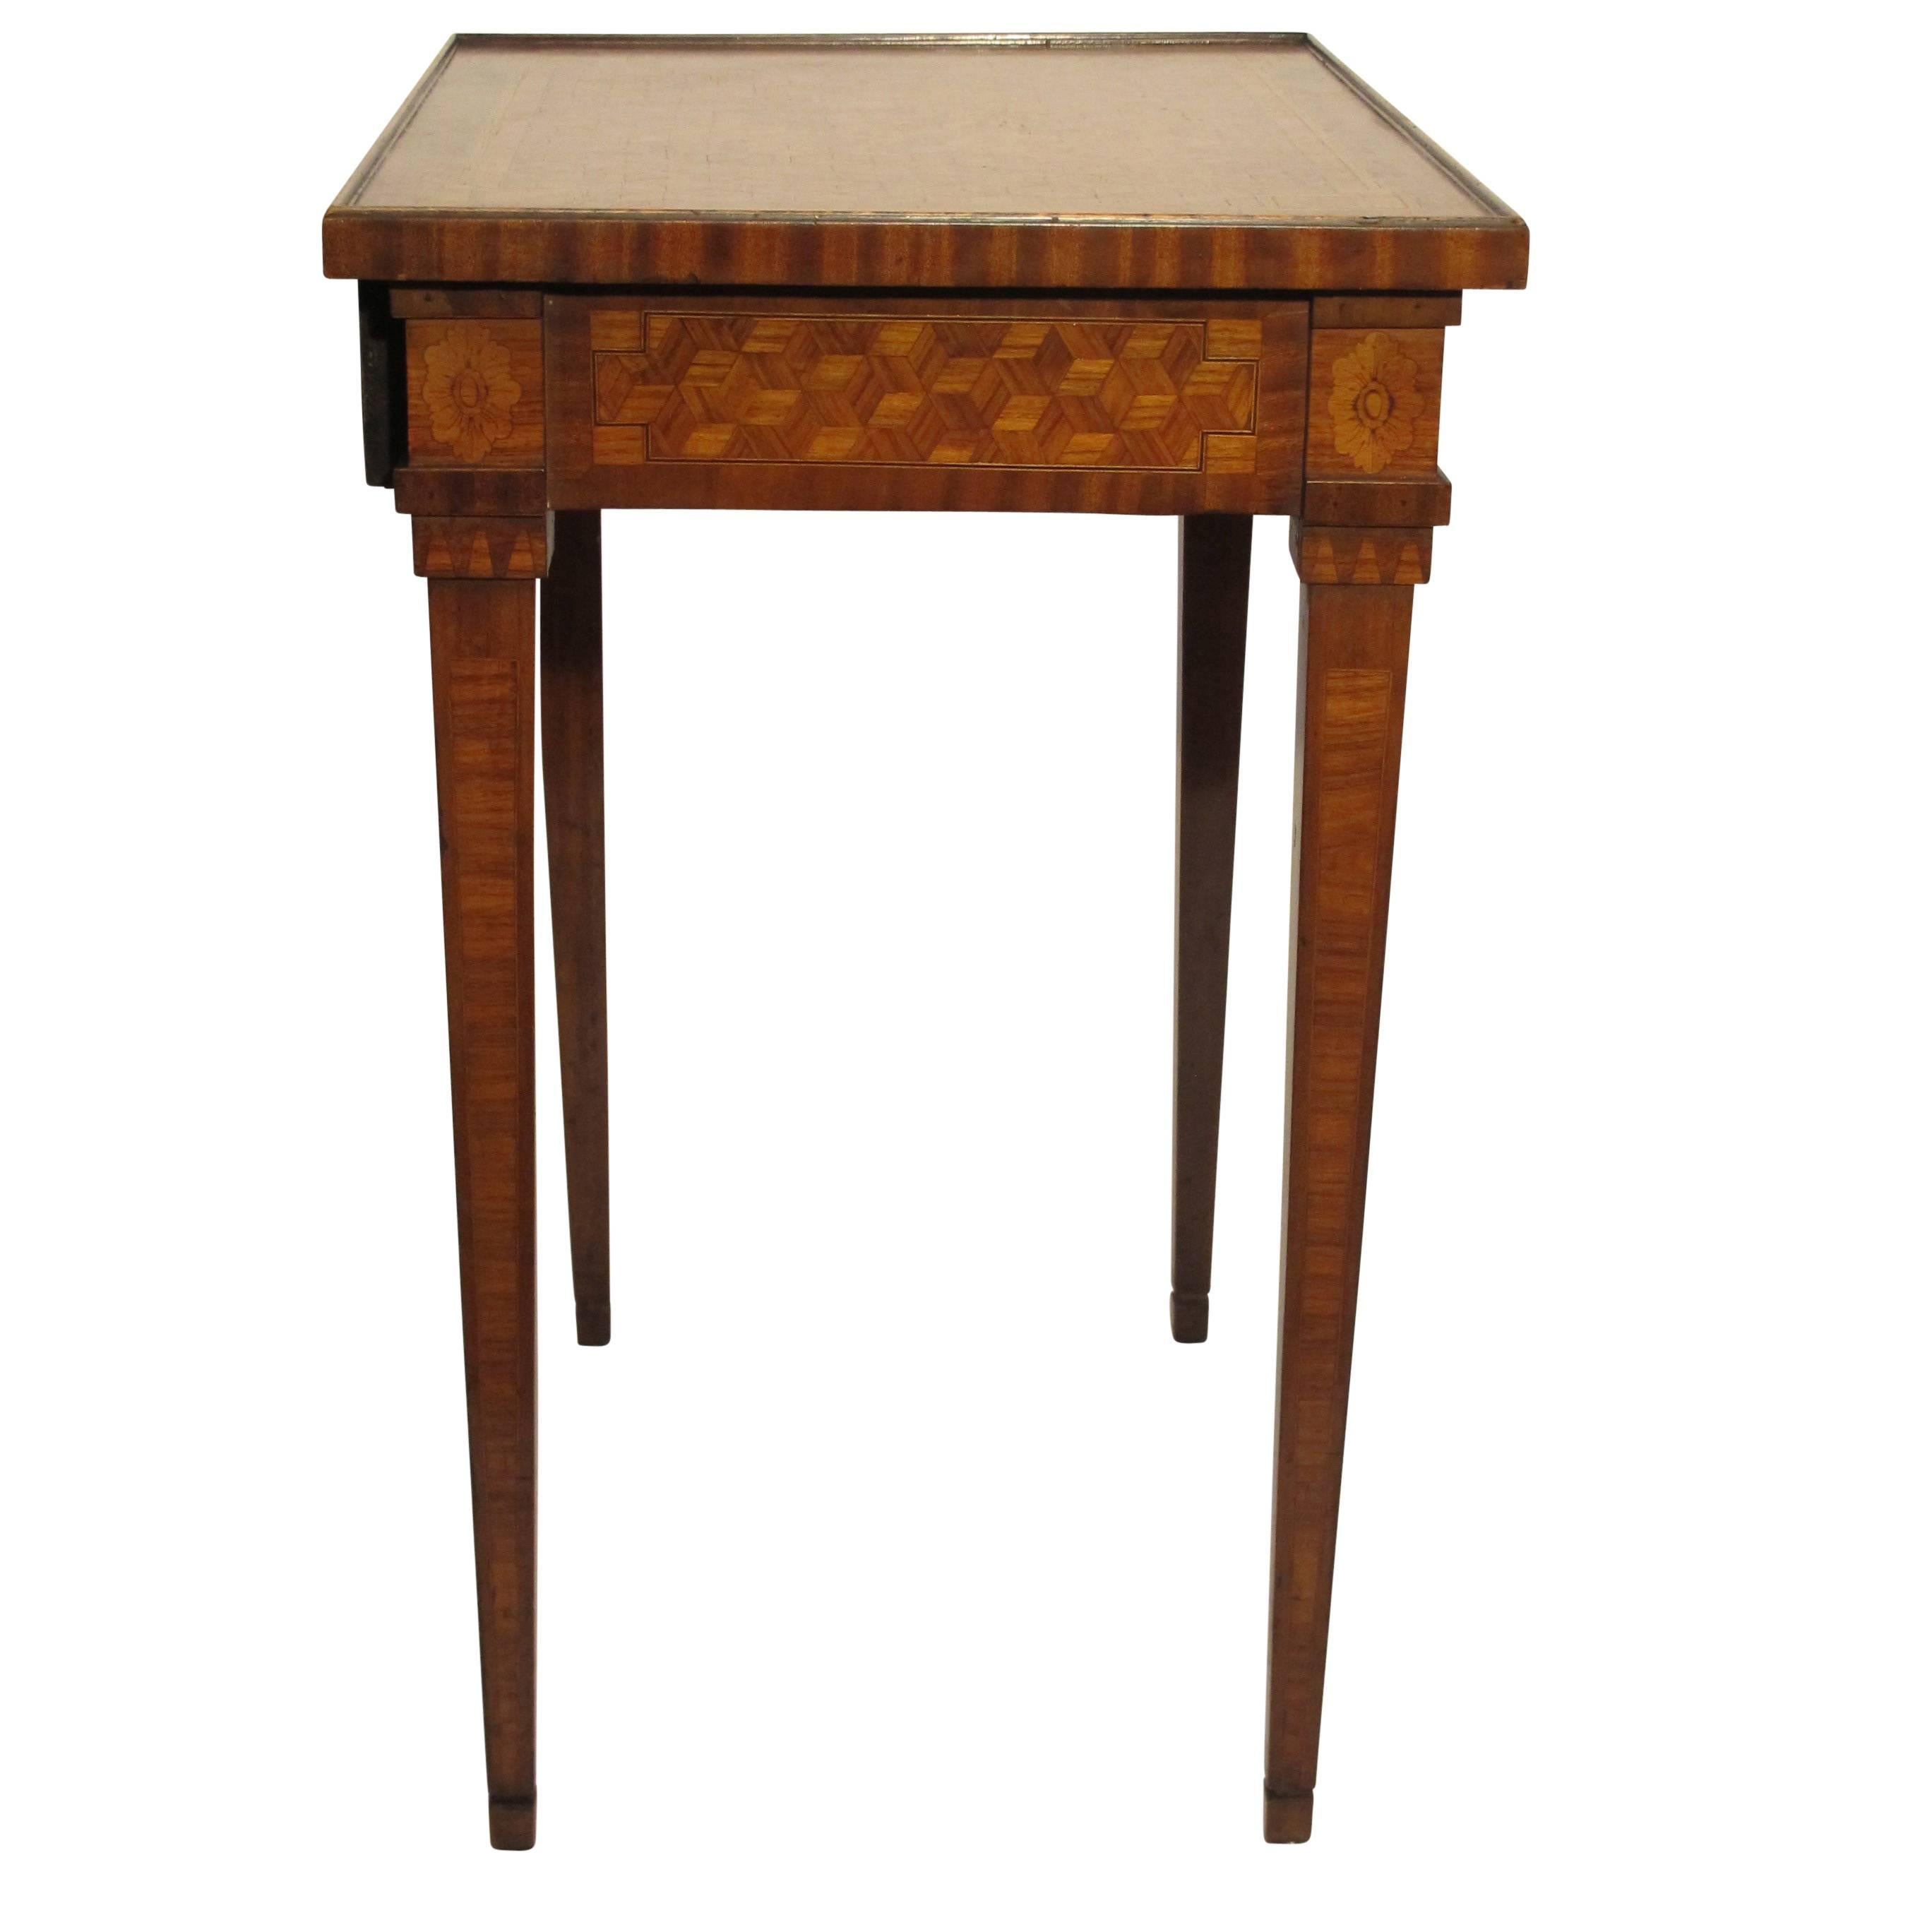 Walnut and Mixed Fruitwood Parquetry Side Table, French, 18th Century For Sale 2